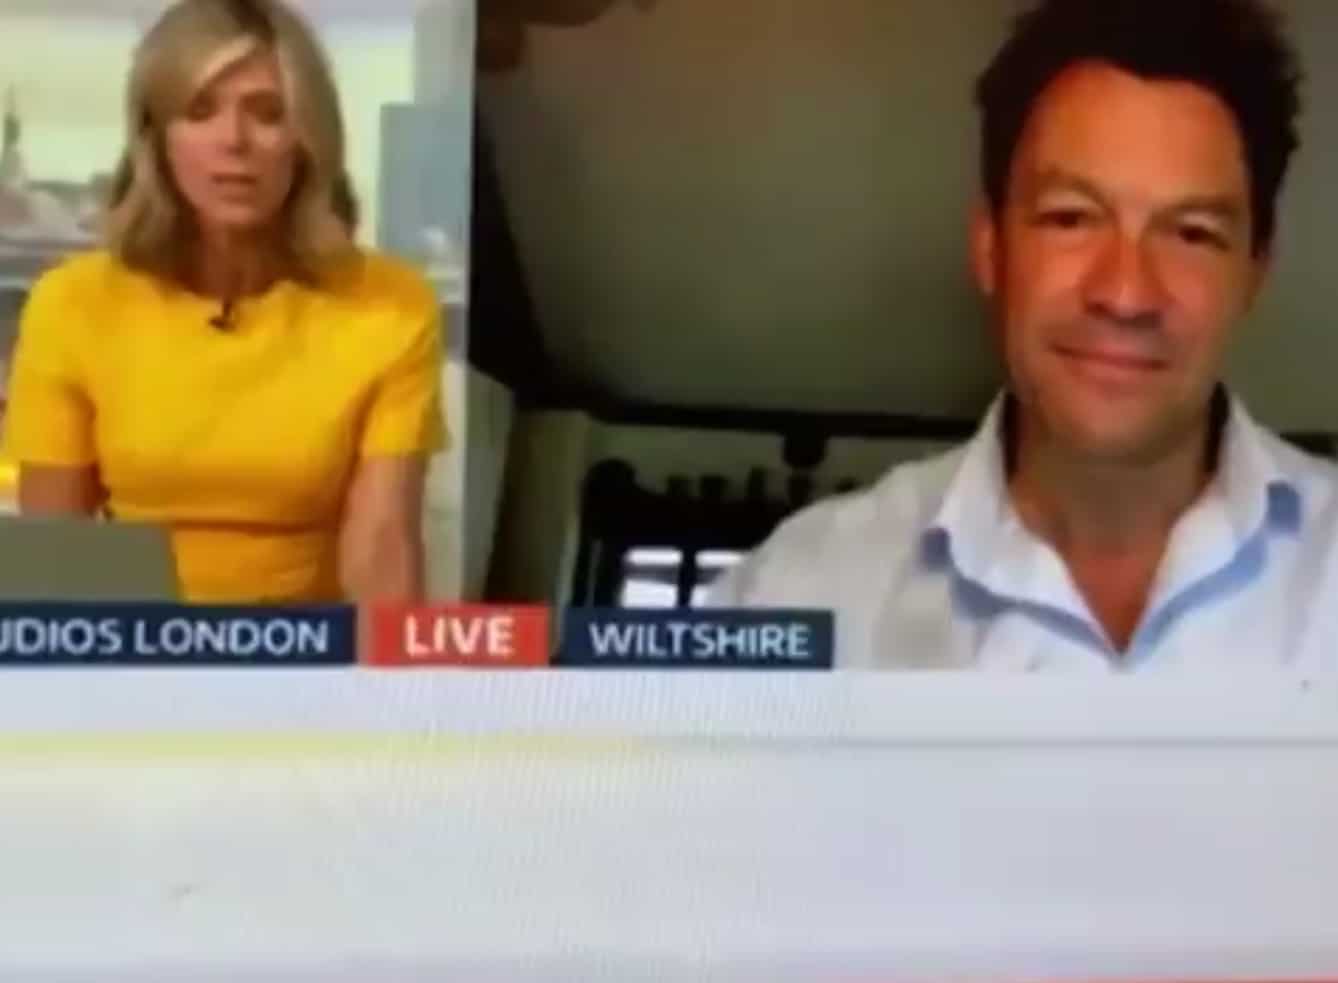 Actor Dominic West says he “jumped for joy” after hearing Trump diagnosis